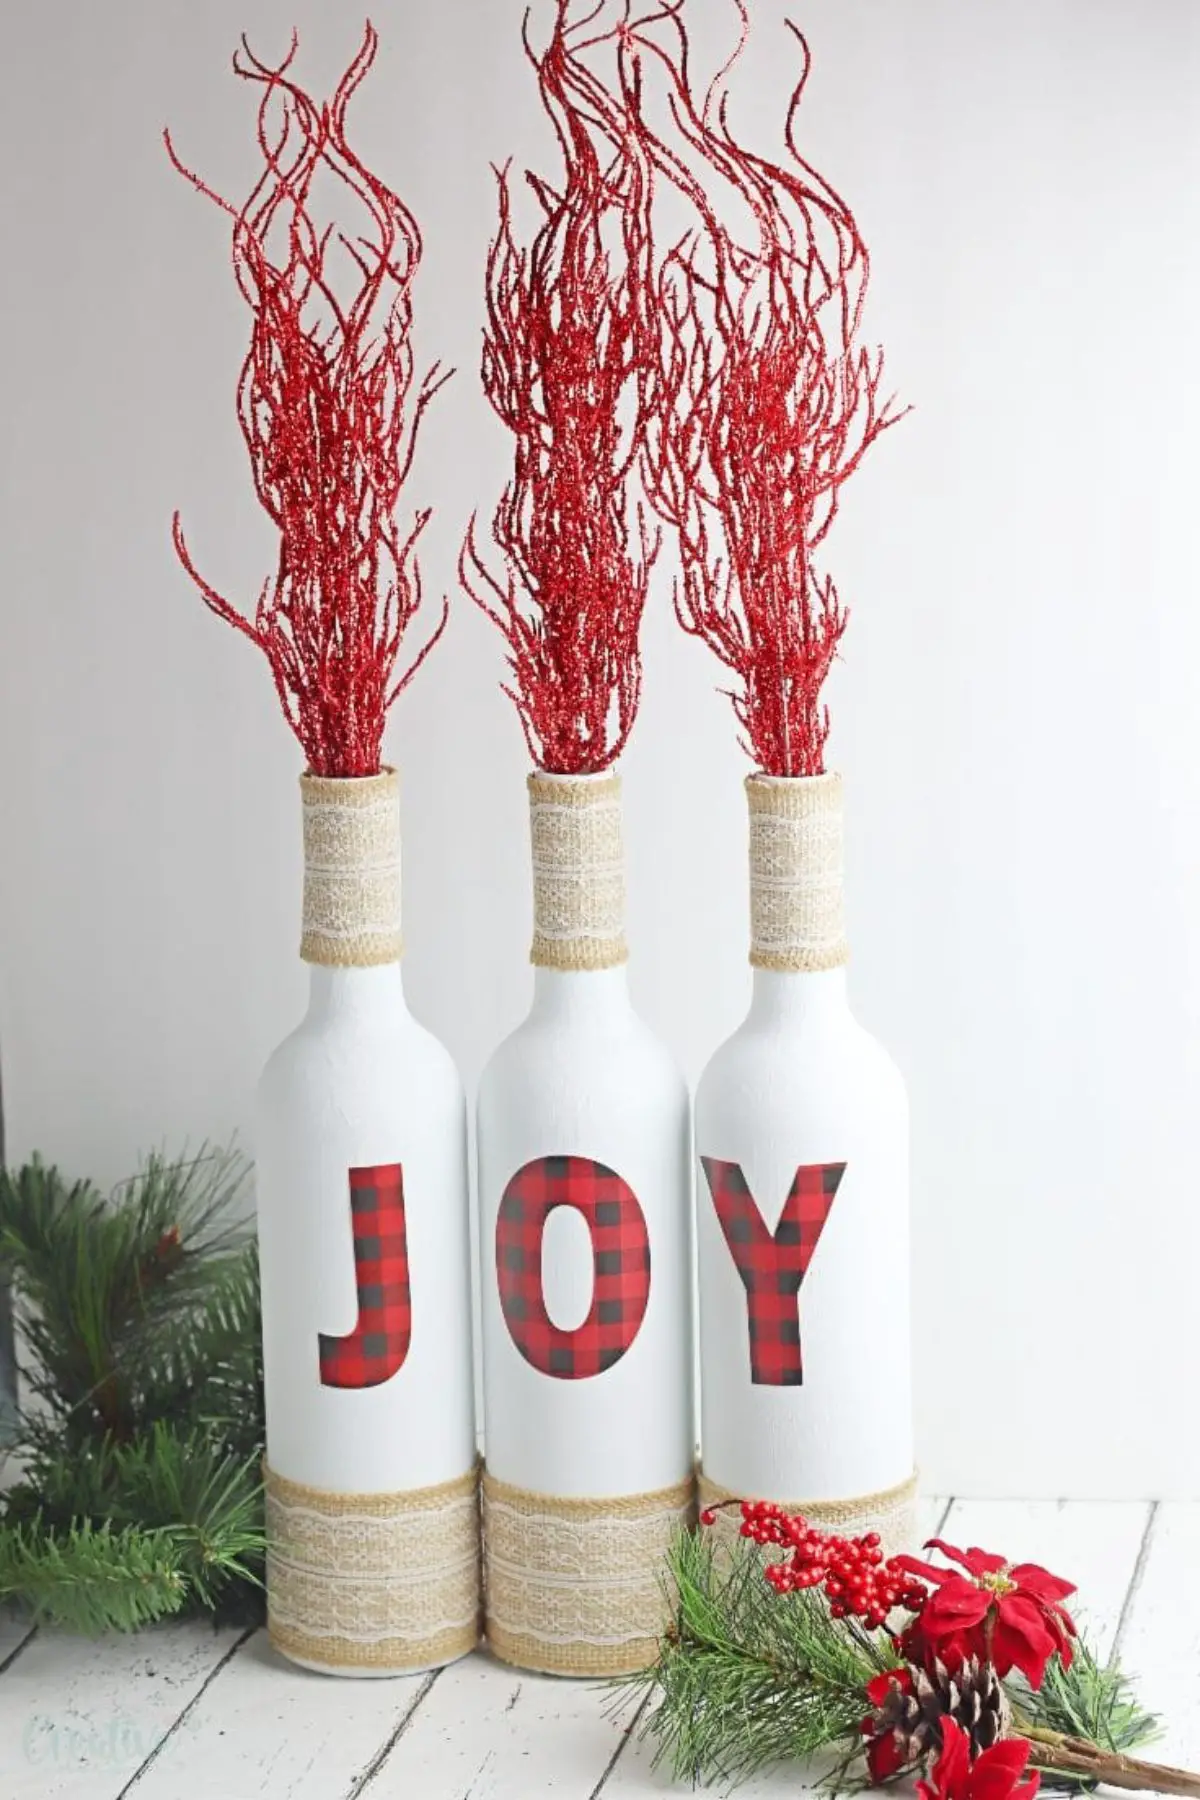 Christmas craft where you turn decorate wine bottles to say Joy